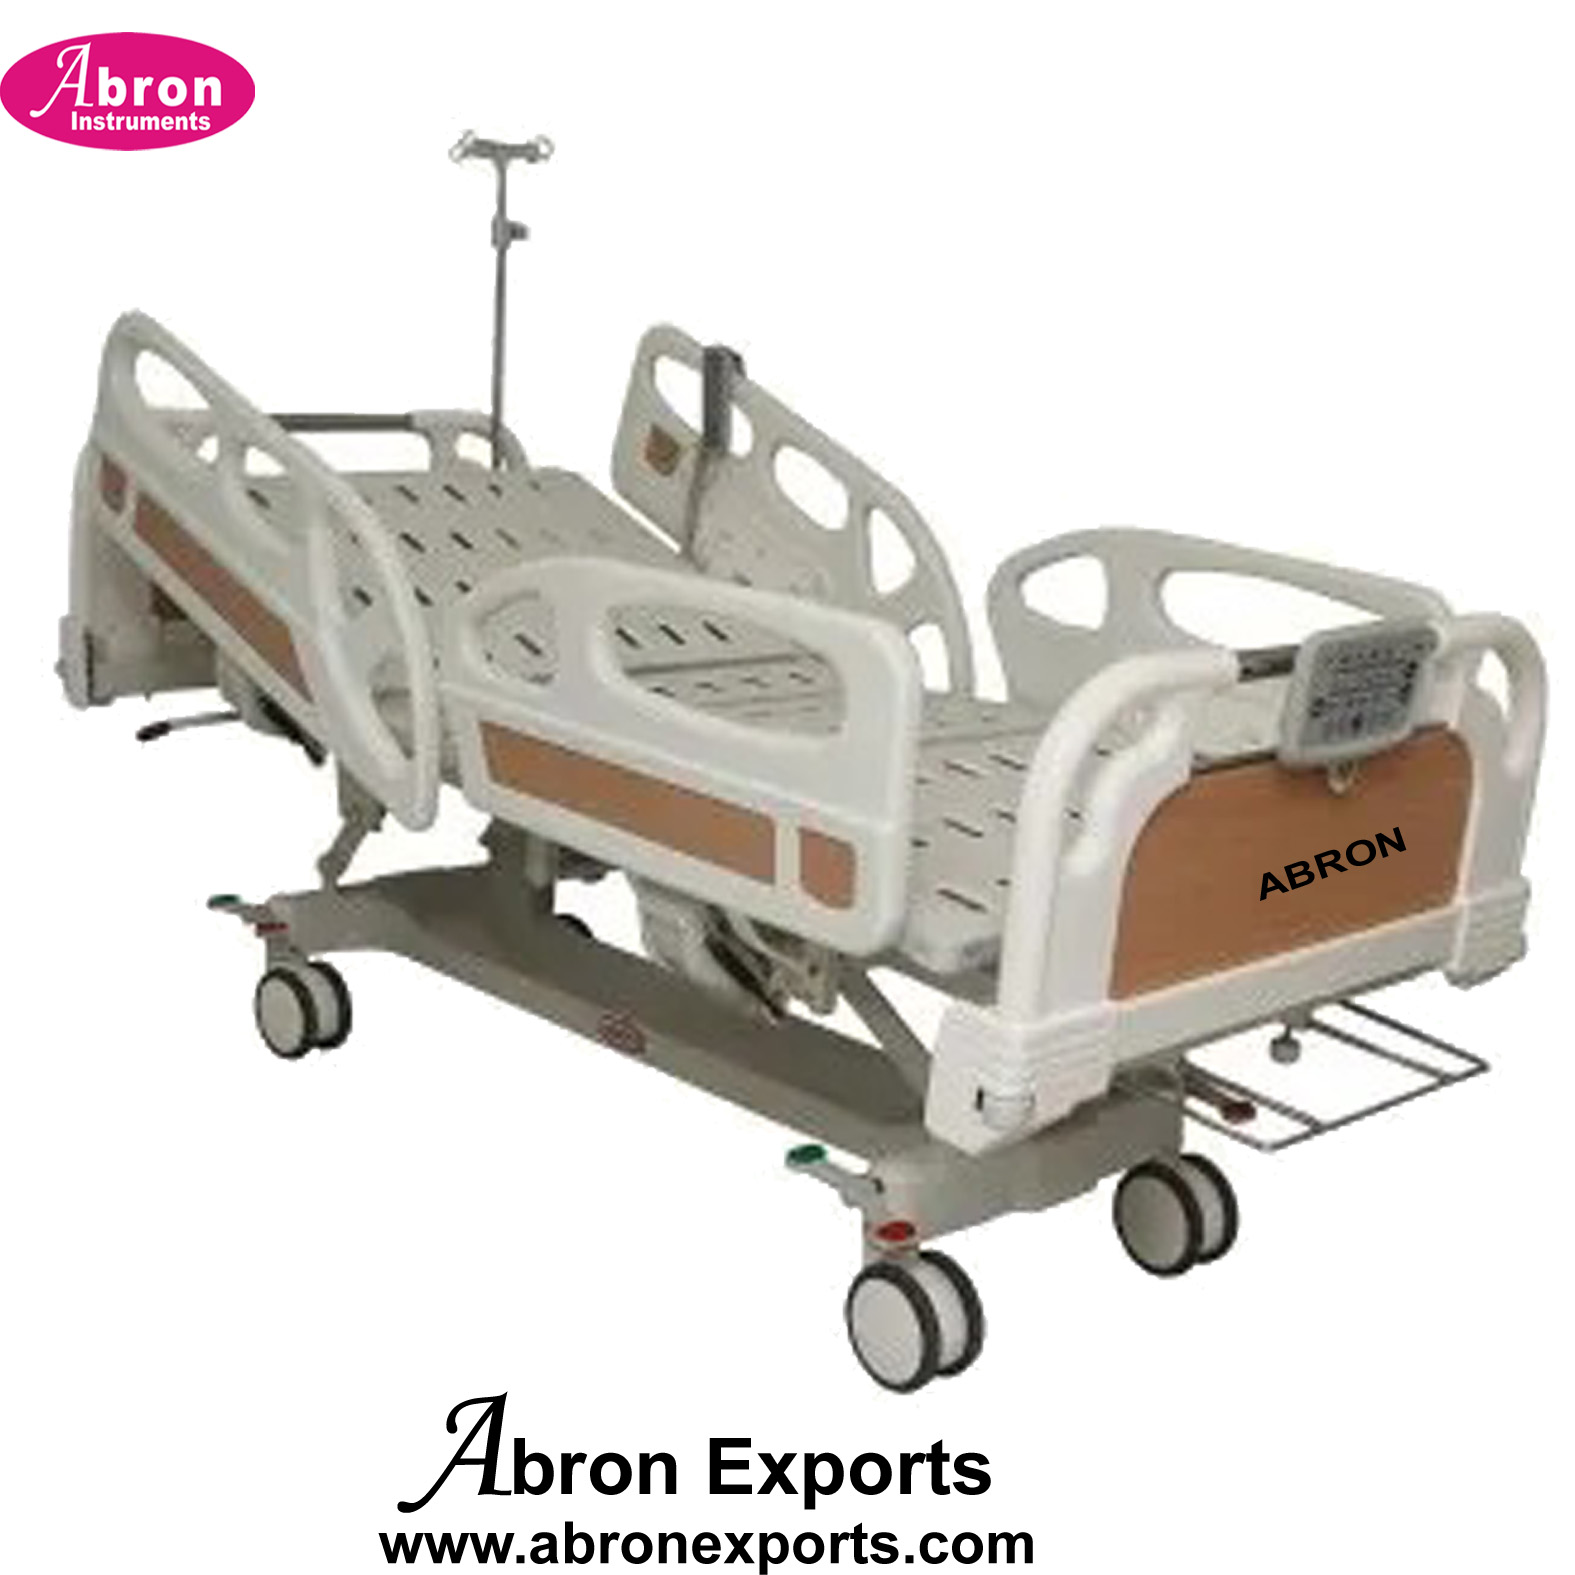 Paitent Stretcher Electric with Fowler Bed Oxygen 2 holder IV stand 2 function 4 wheel U84 Abron ABM-2261SEIV 